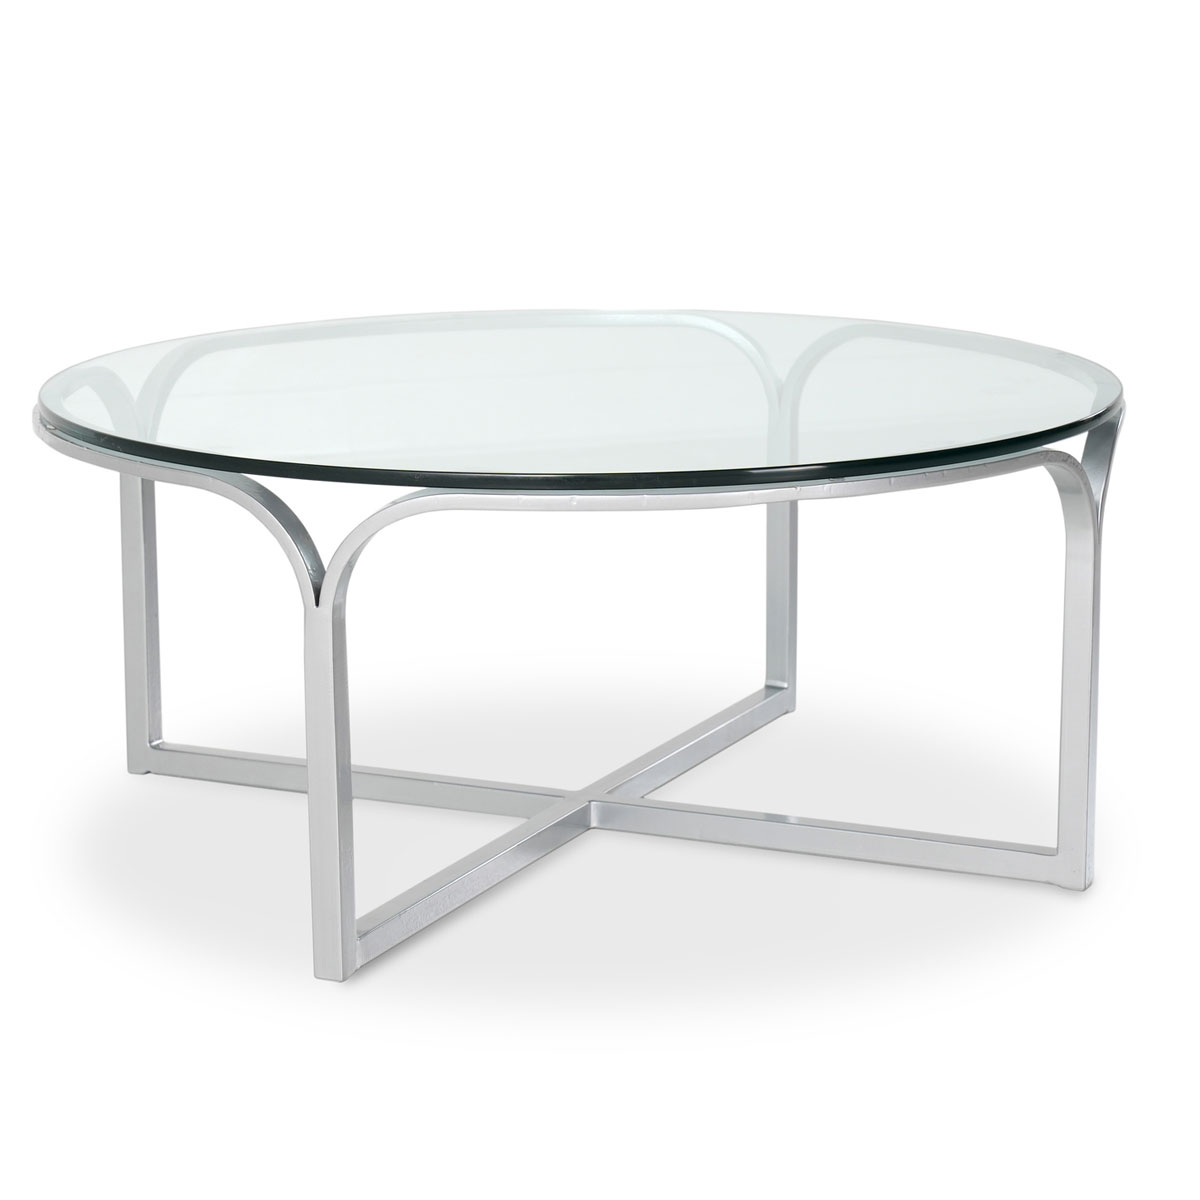 Charleston Forge Wave 36 inch Round Cocktail Table 